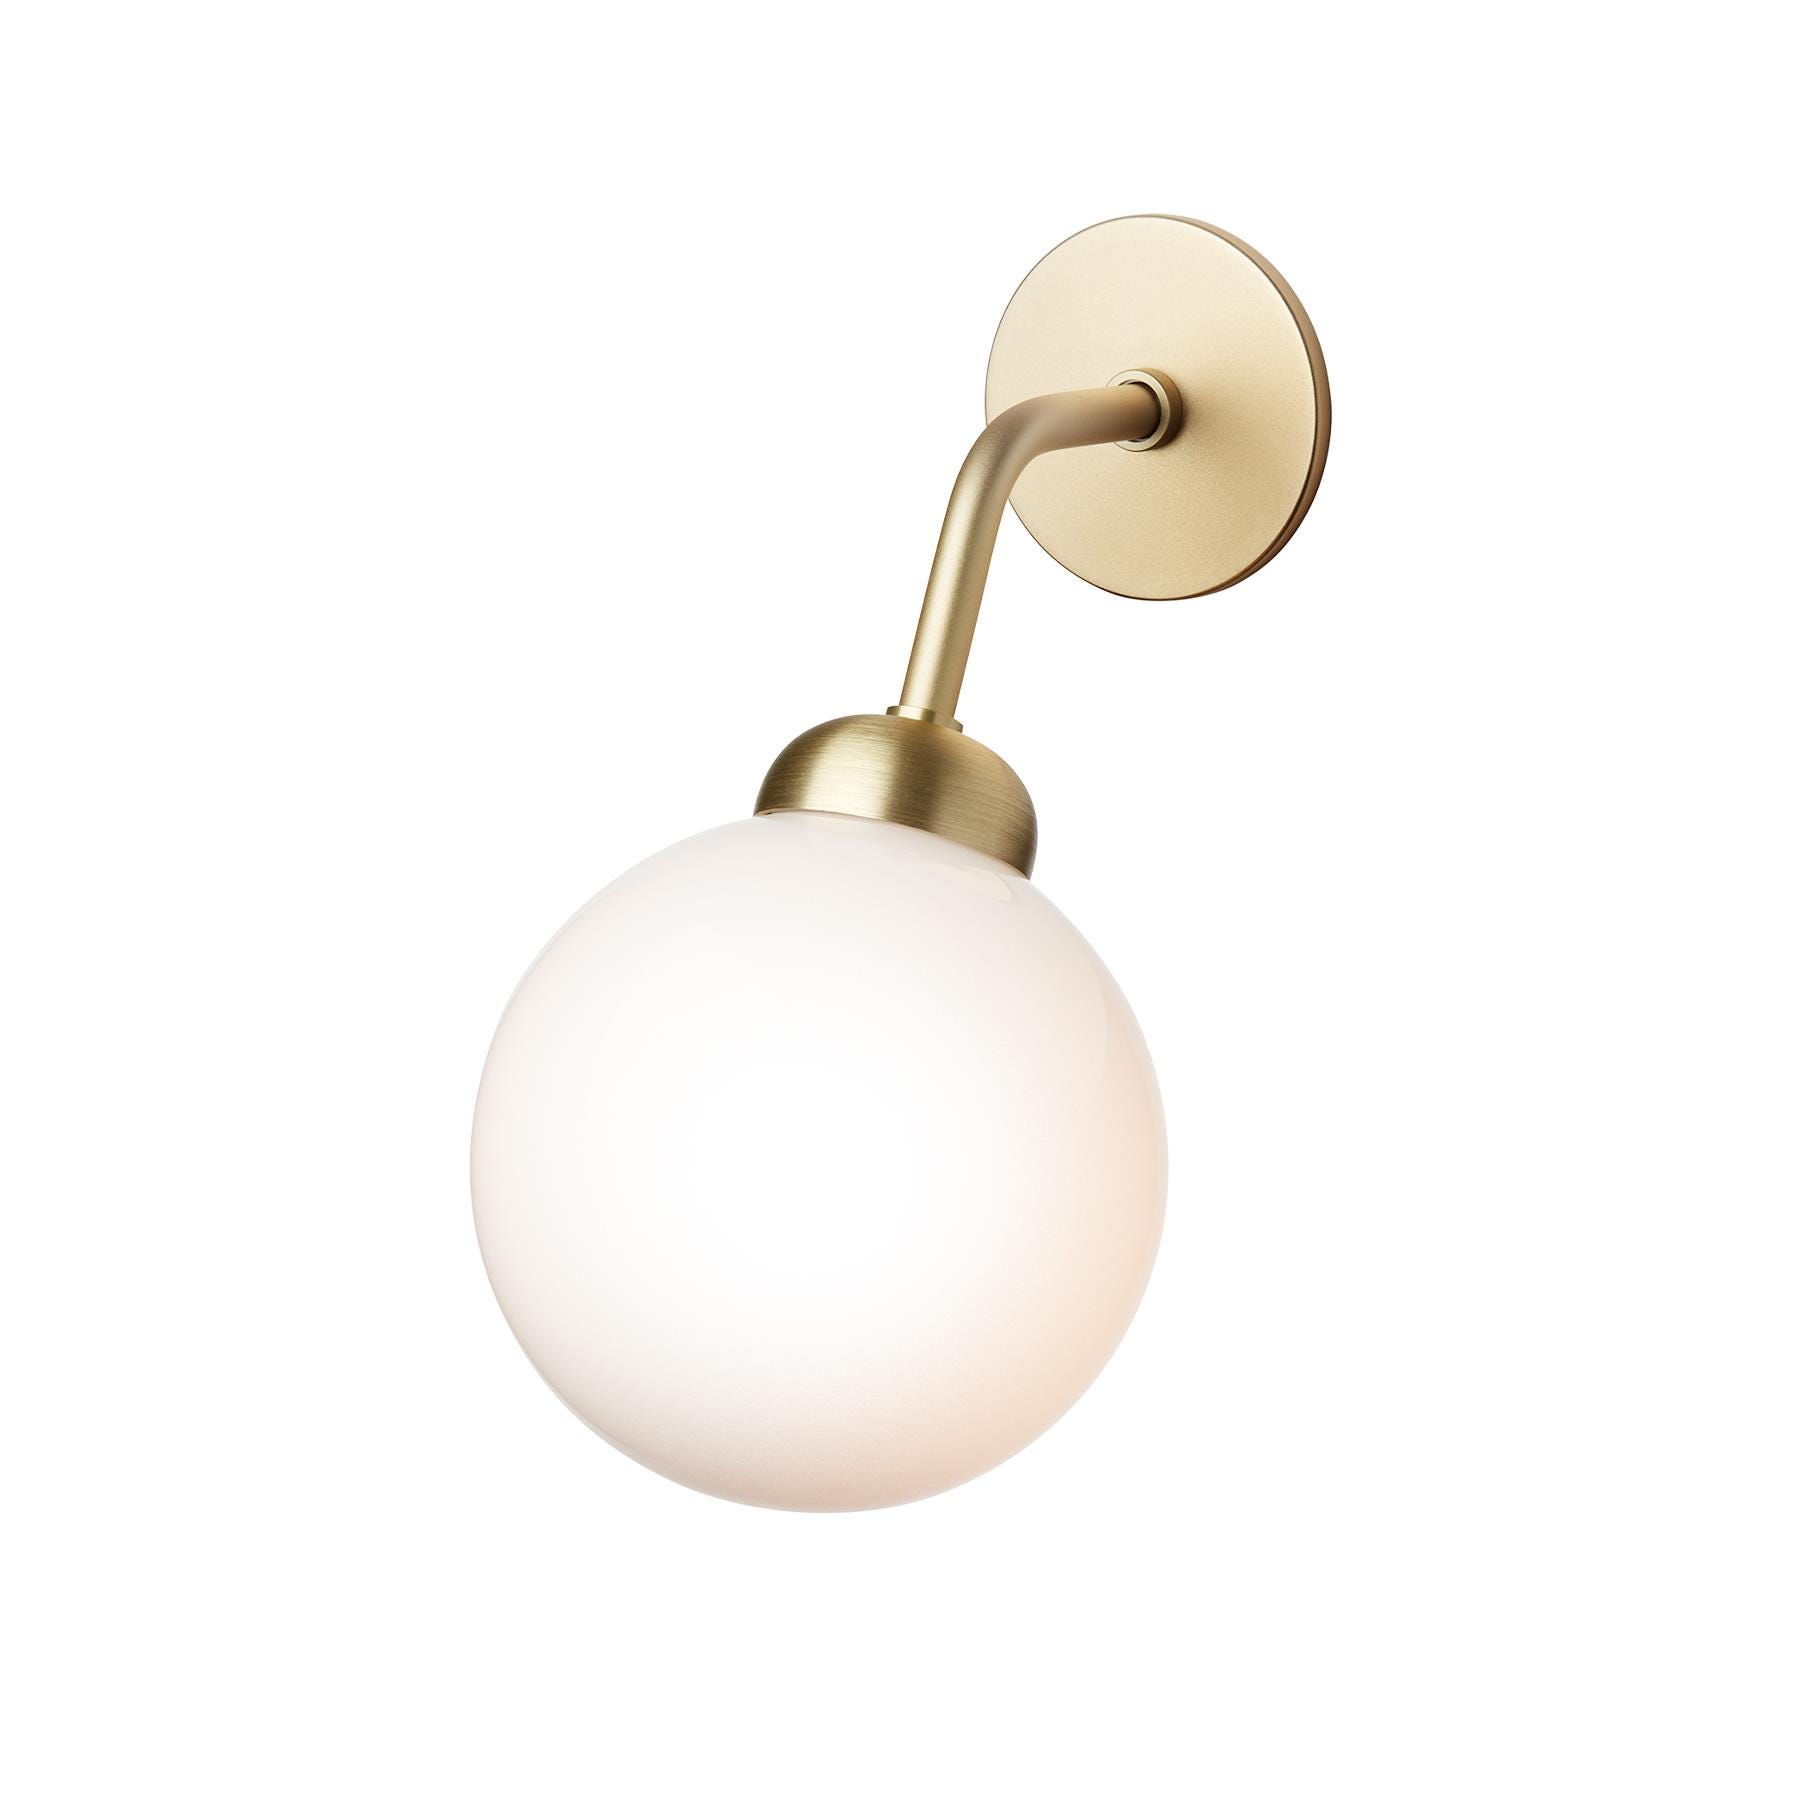 Nuura Apiales Hard Wired Wall Light Brushed Brass Wall Lighting Brassgold